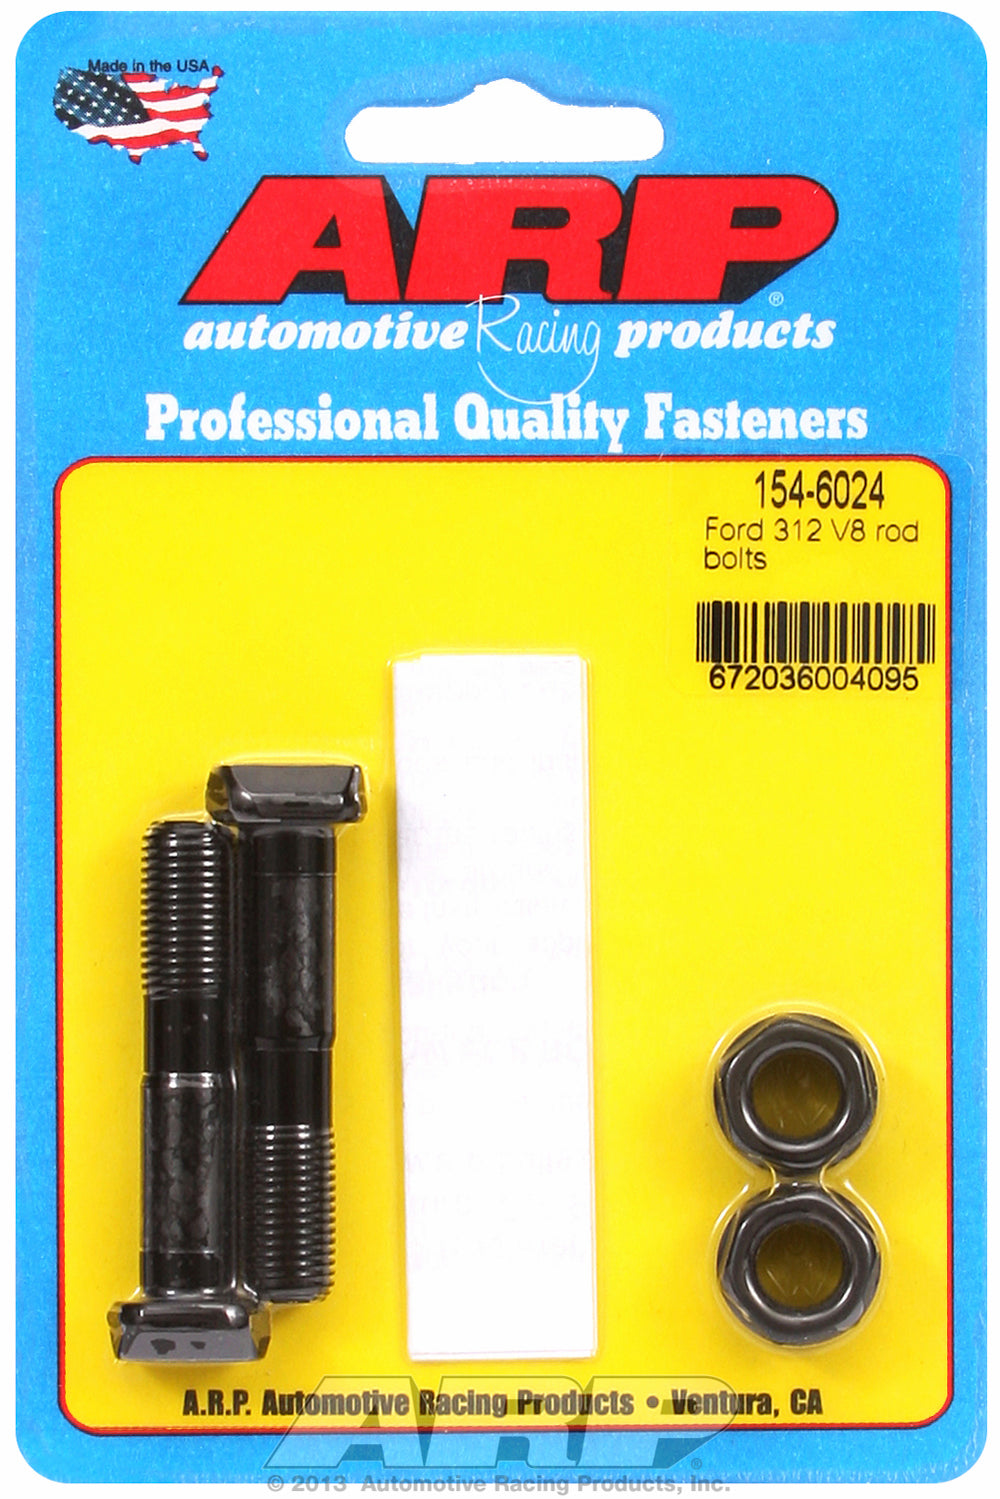 Hi-Perf 8740 (2-pc) Rod Bolt Kit for Ford 239-256-272-292 Y block (rod marked ECZ)